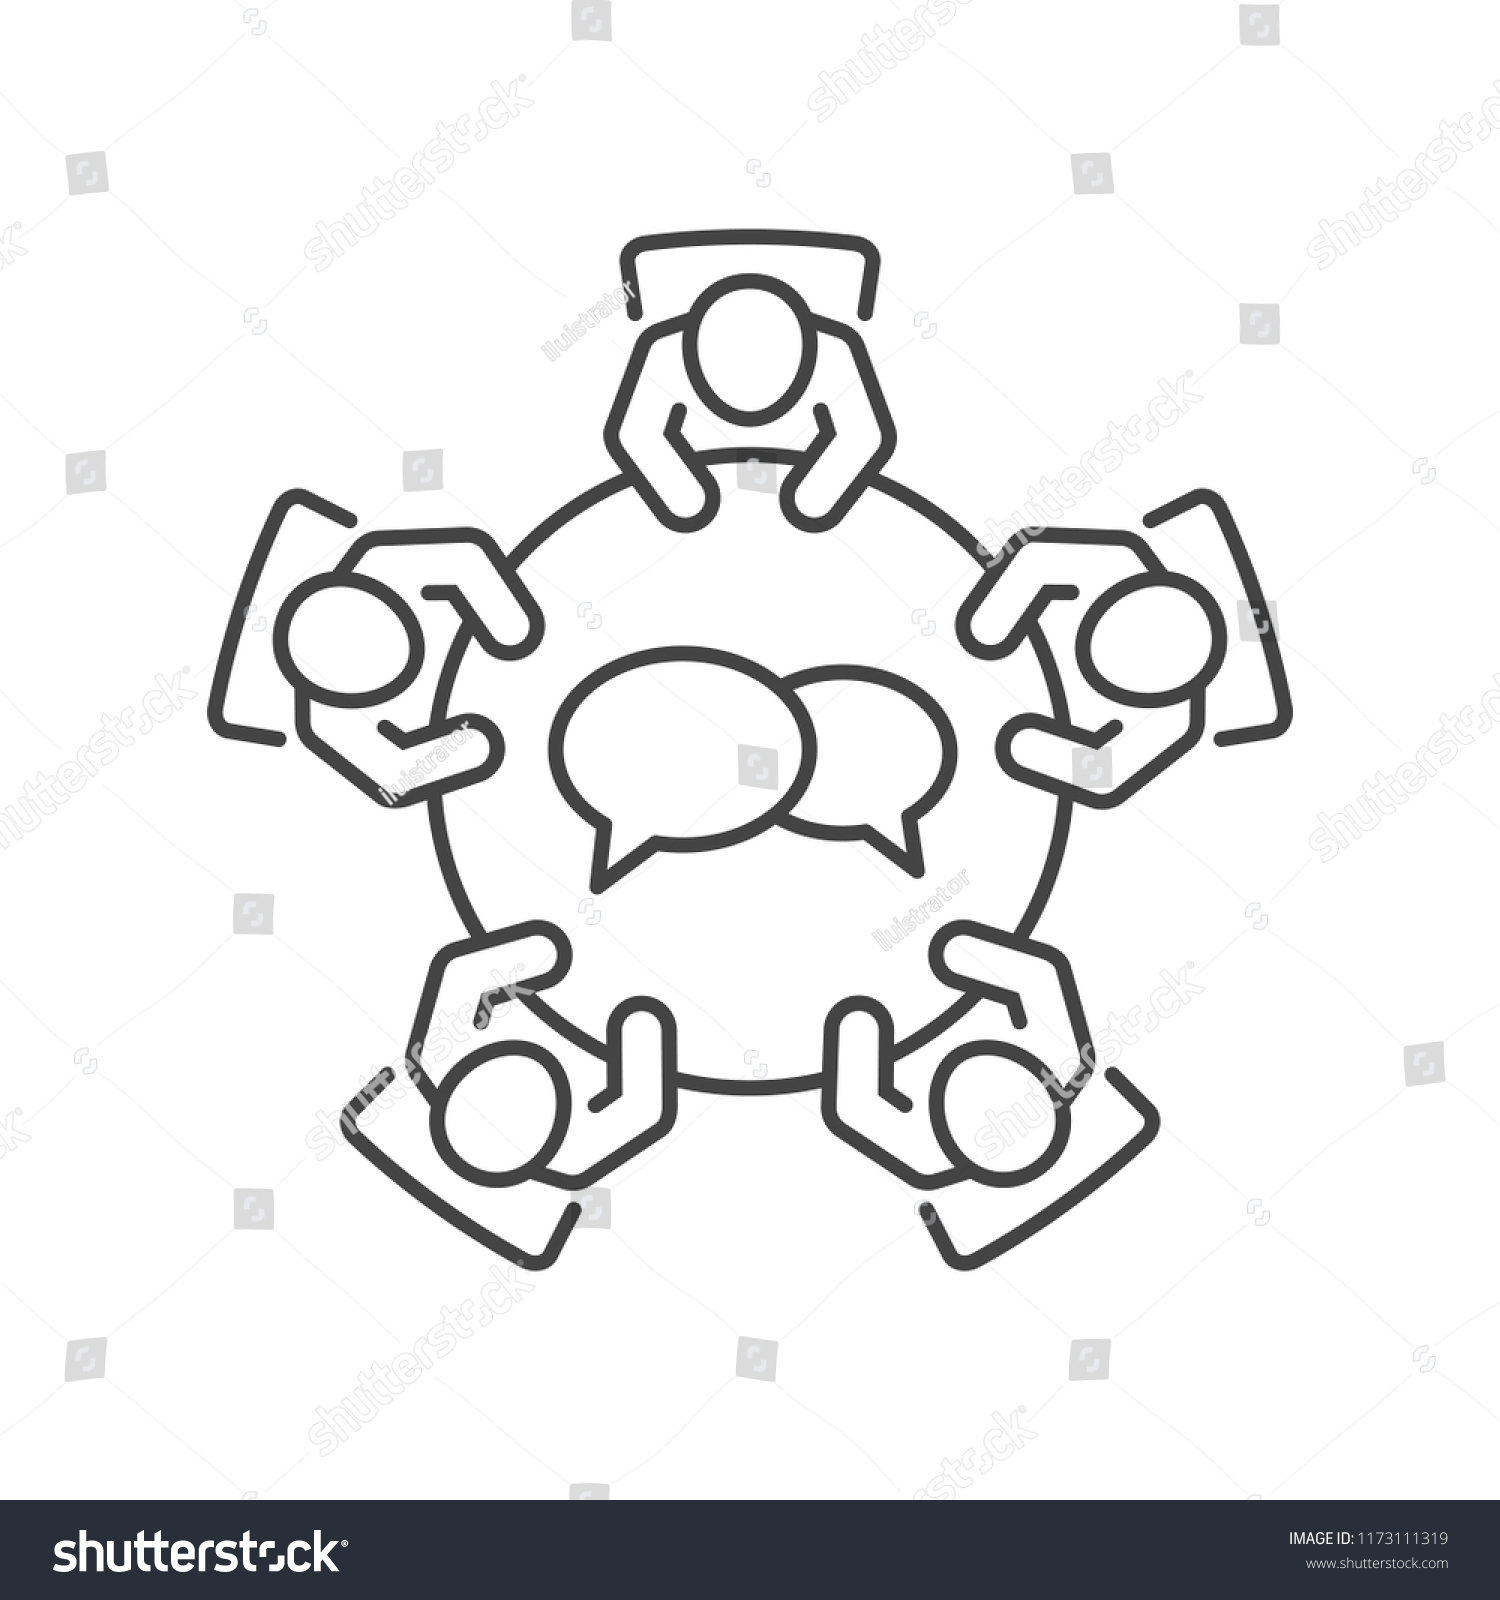 SVG of 
Brainstorming and teamwork icon. Business meeting. Discussion group. Debate team. Group of people in conference room sitting around a table working together on new creative projects. svg